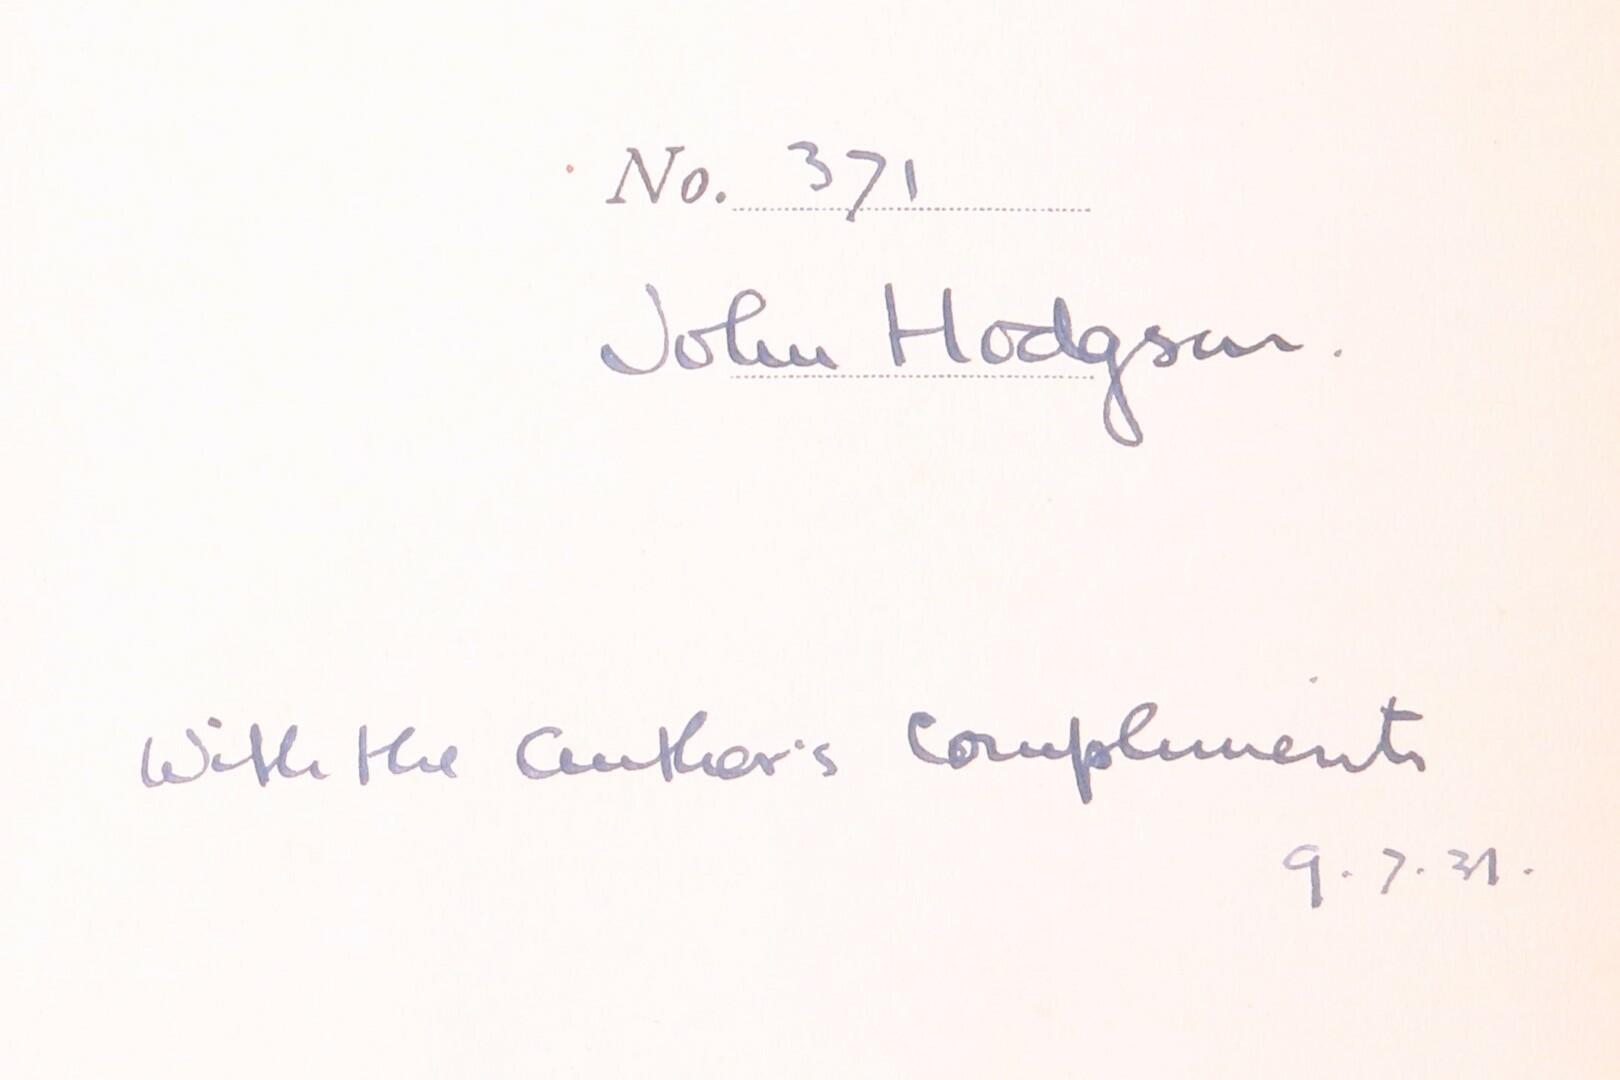 John Hodgson - The Time-Journey of Dr. Barton: An Engineering and Sociological Forecast based on Present Possibilities - John Hodgson, 1929, Signed Limited Edition.